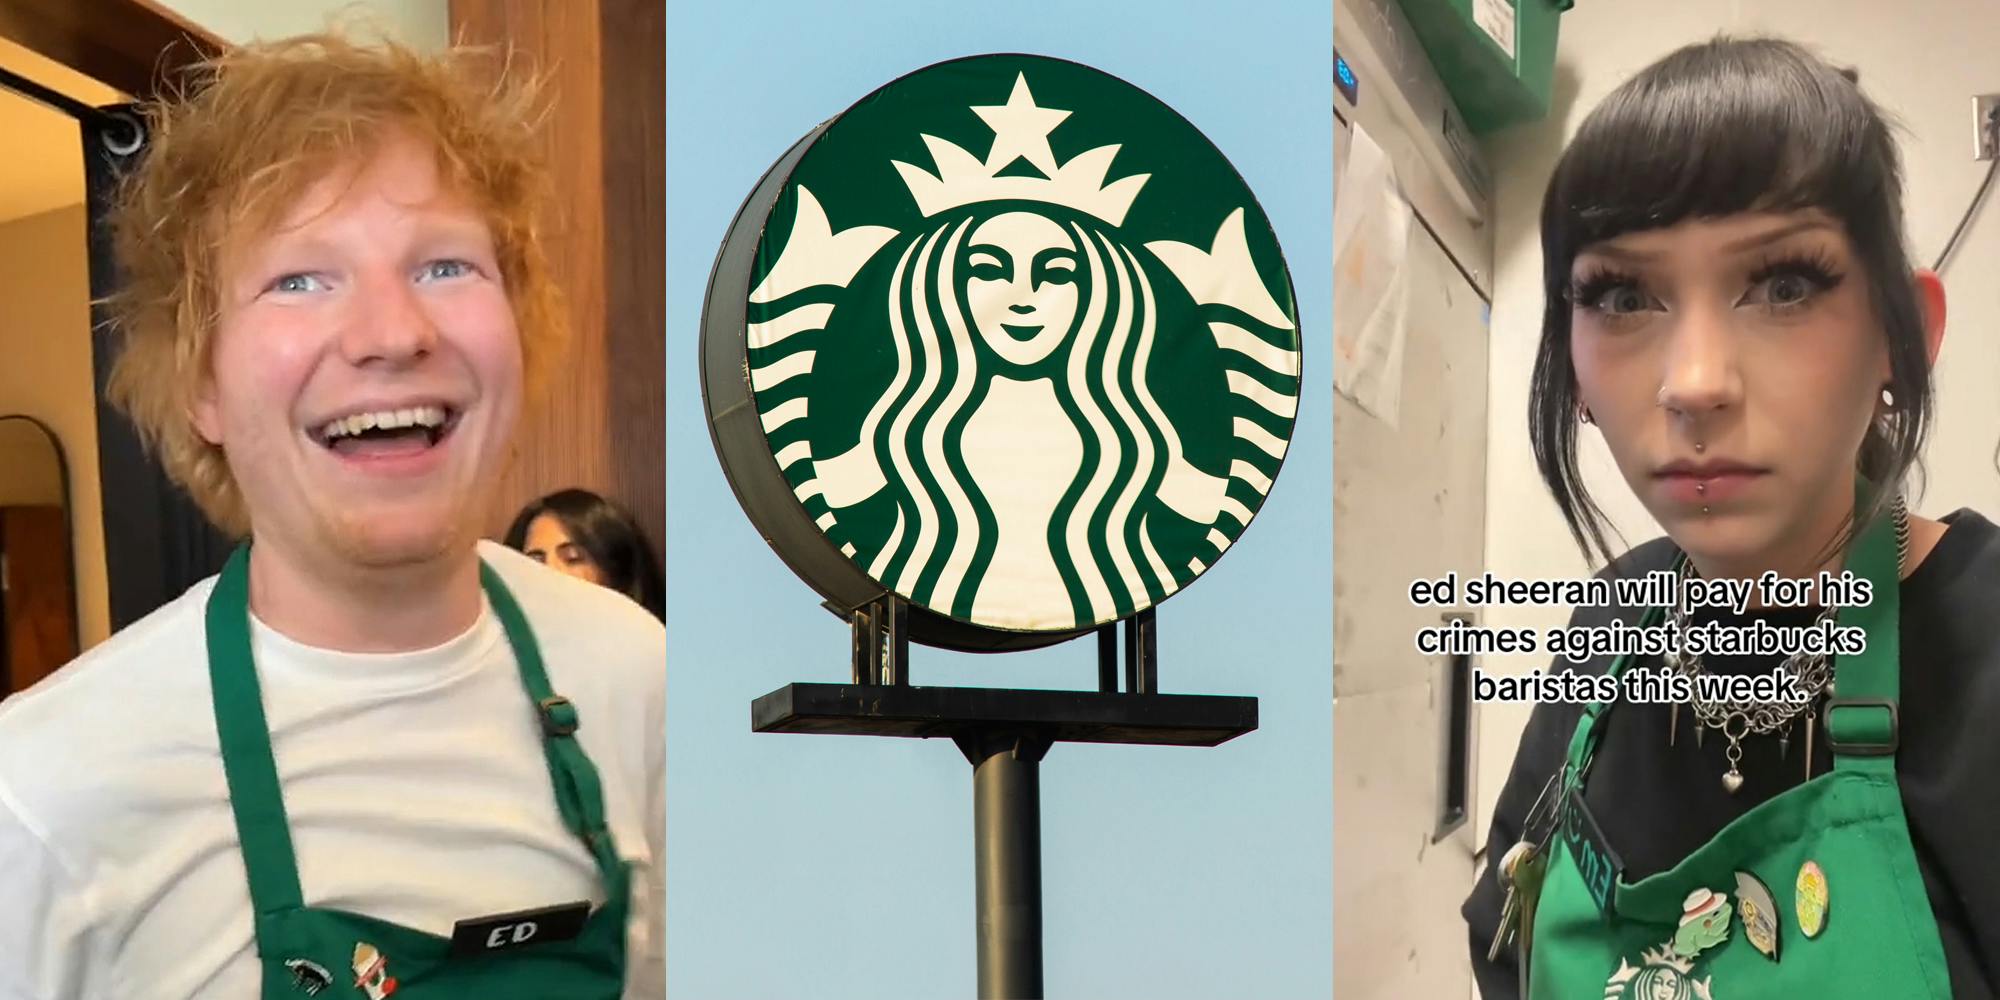 Ed Sheeran with Starbucks apron on (l) Starbucks sign with blue sky (c) Starbucks barista with caption "ed sheeran will pay for his crimes against starbucks baristas this week," (r)